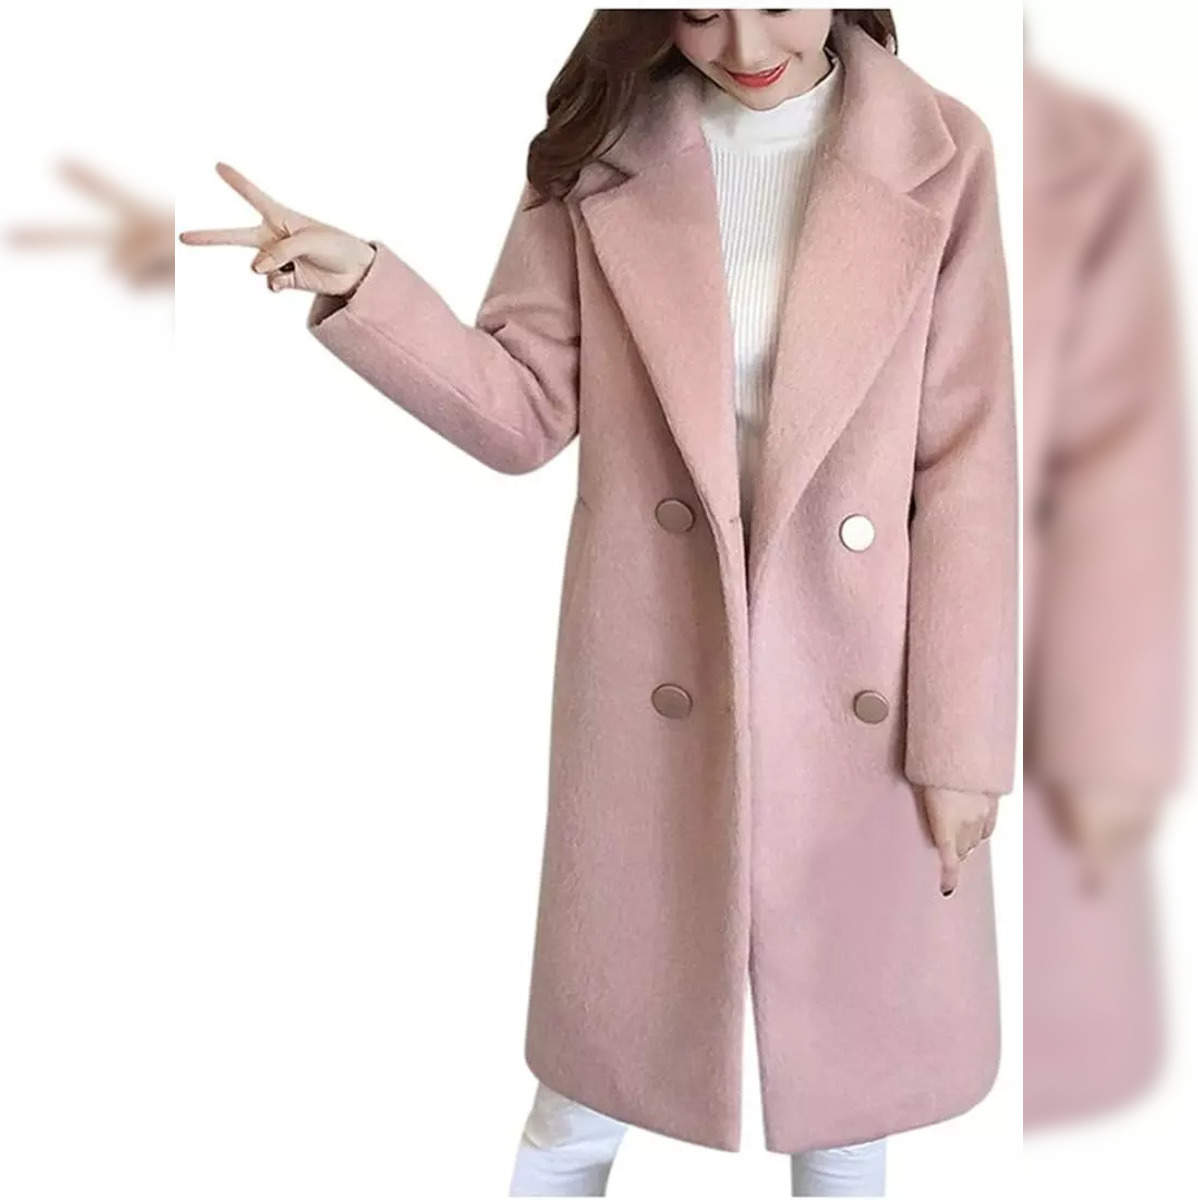 Jackets & Coats, Wool Coat Double Breasted Pea Coat Winter Long Trench Coat  With Belt For Women